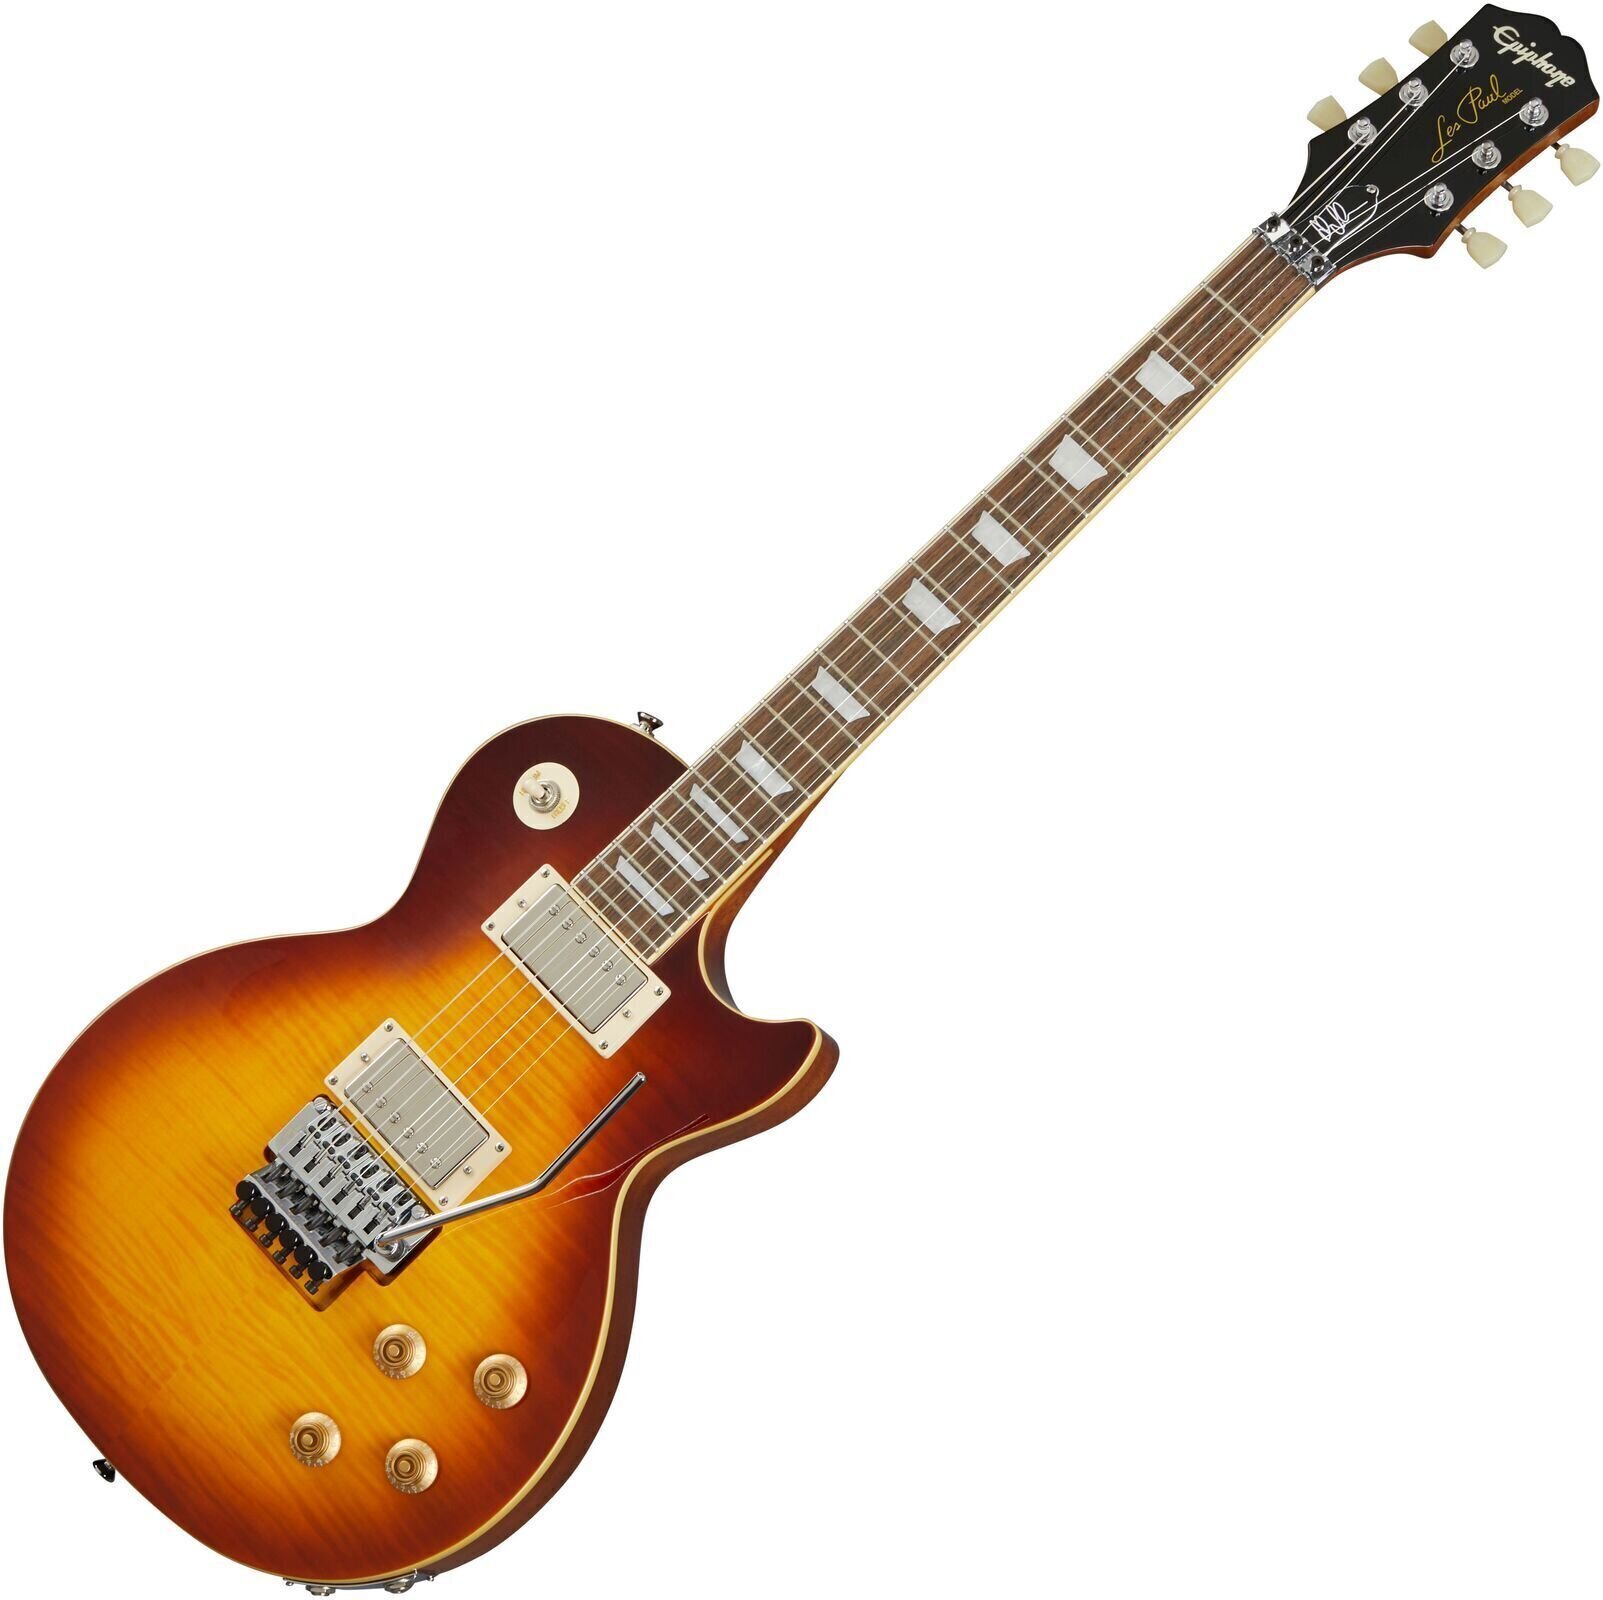 Epiphone Alex Lifeson Les Paul Axcess Standard Viceroy Brown Epiphone